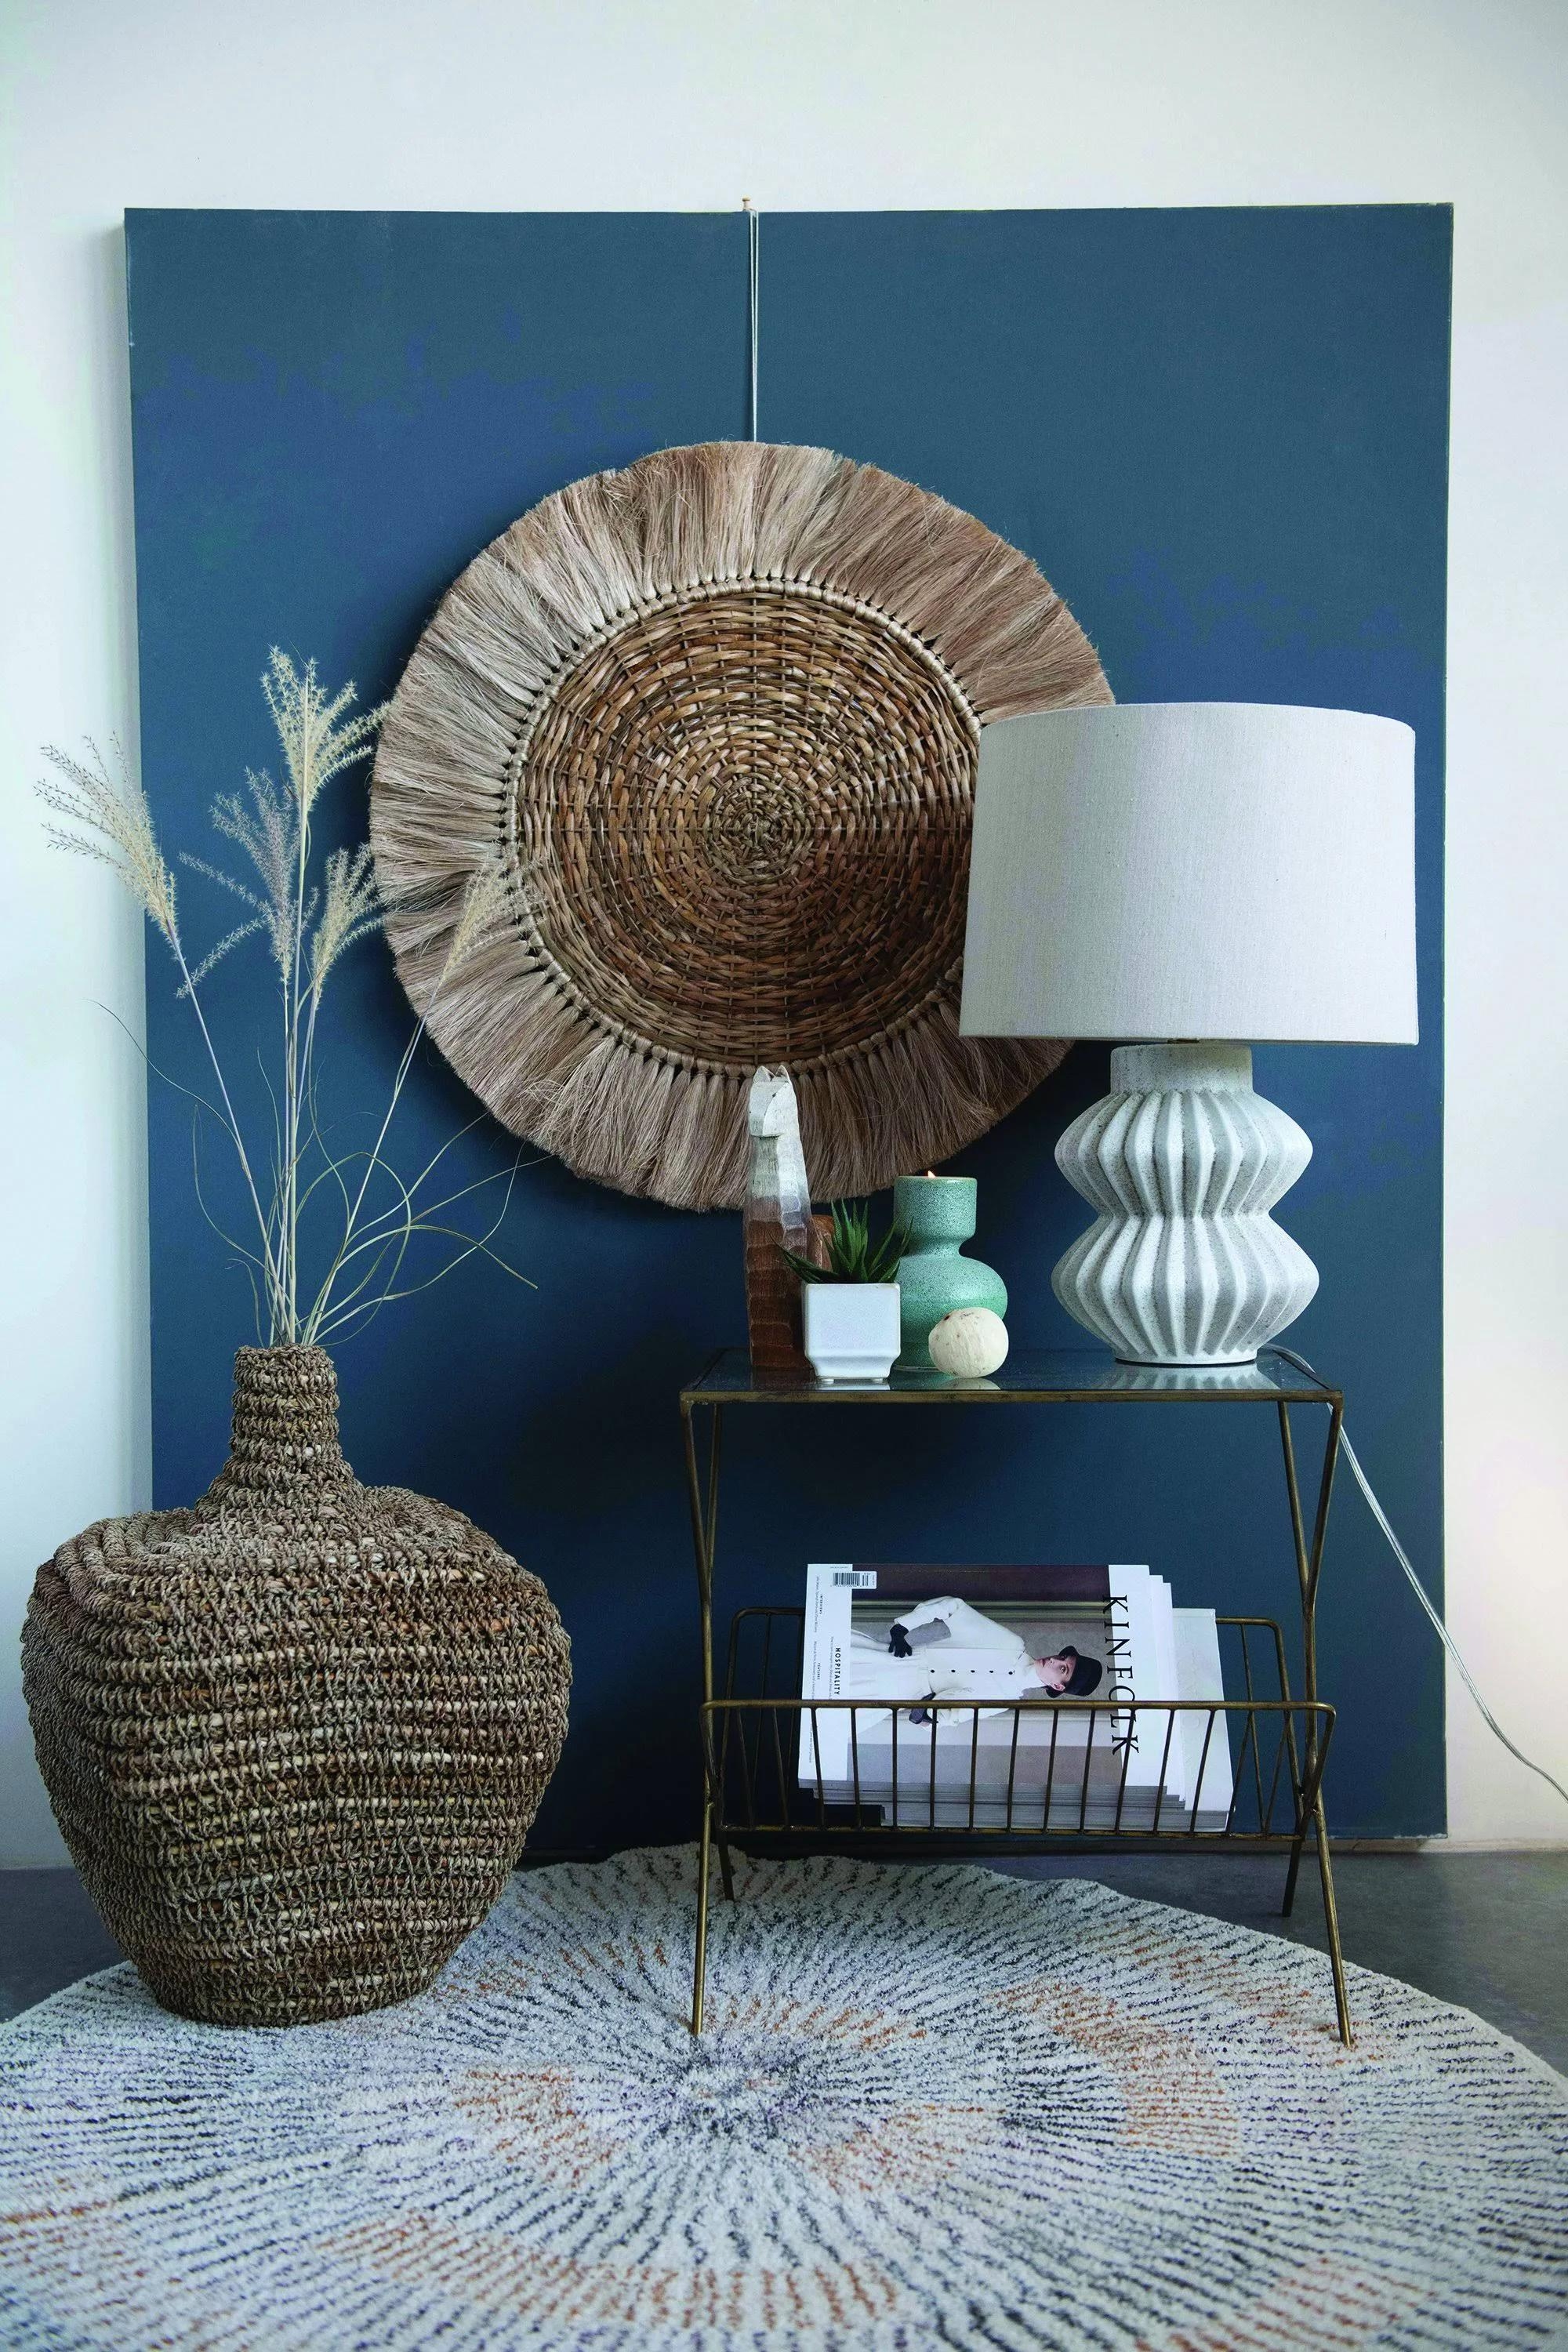 Handwoven Round Rattan & Abaca Wall Décor, 28" - Image 5